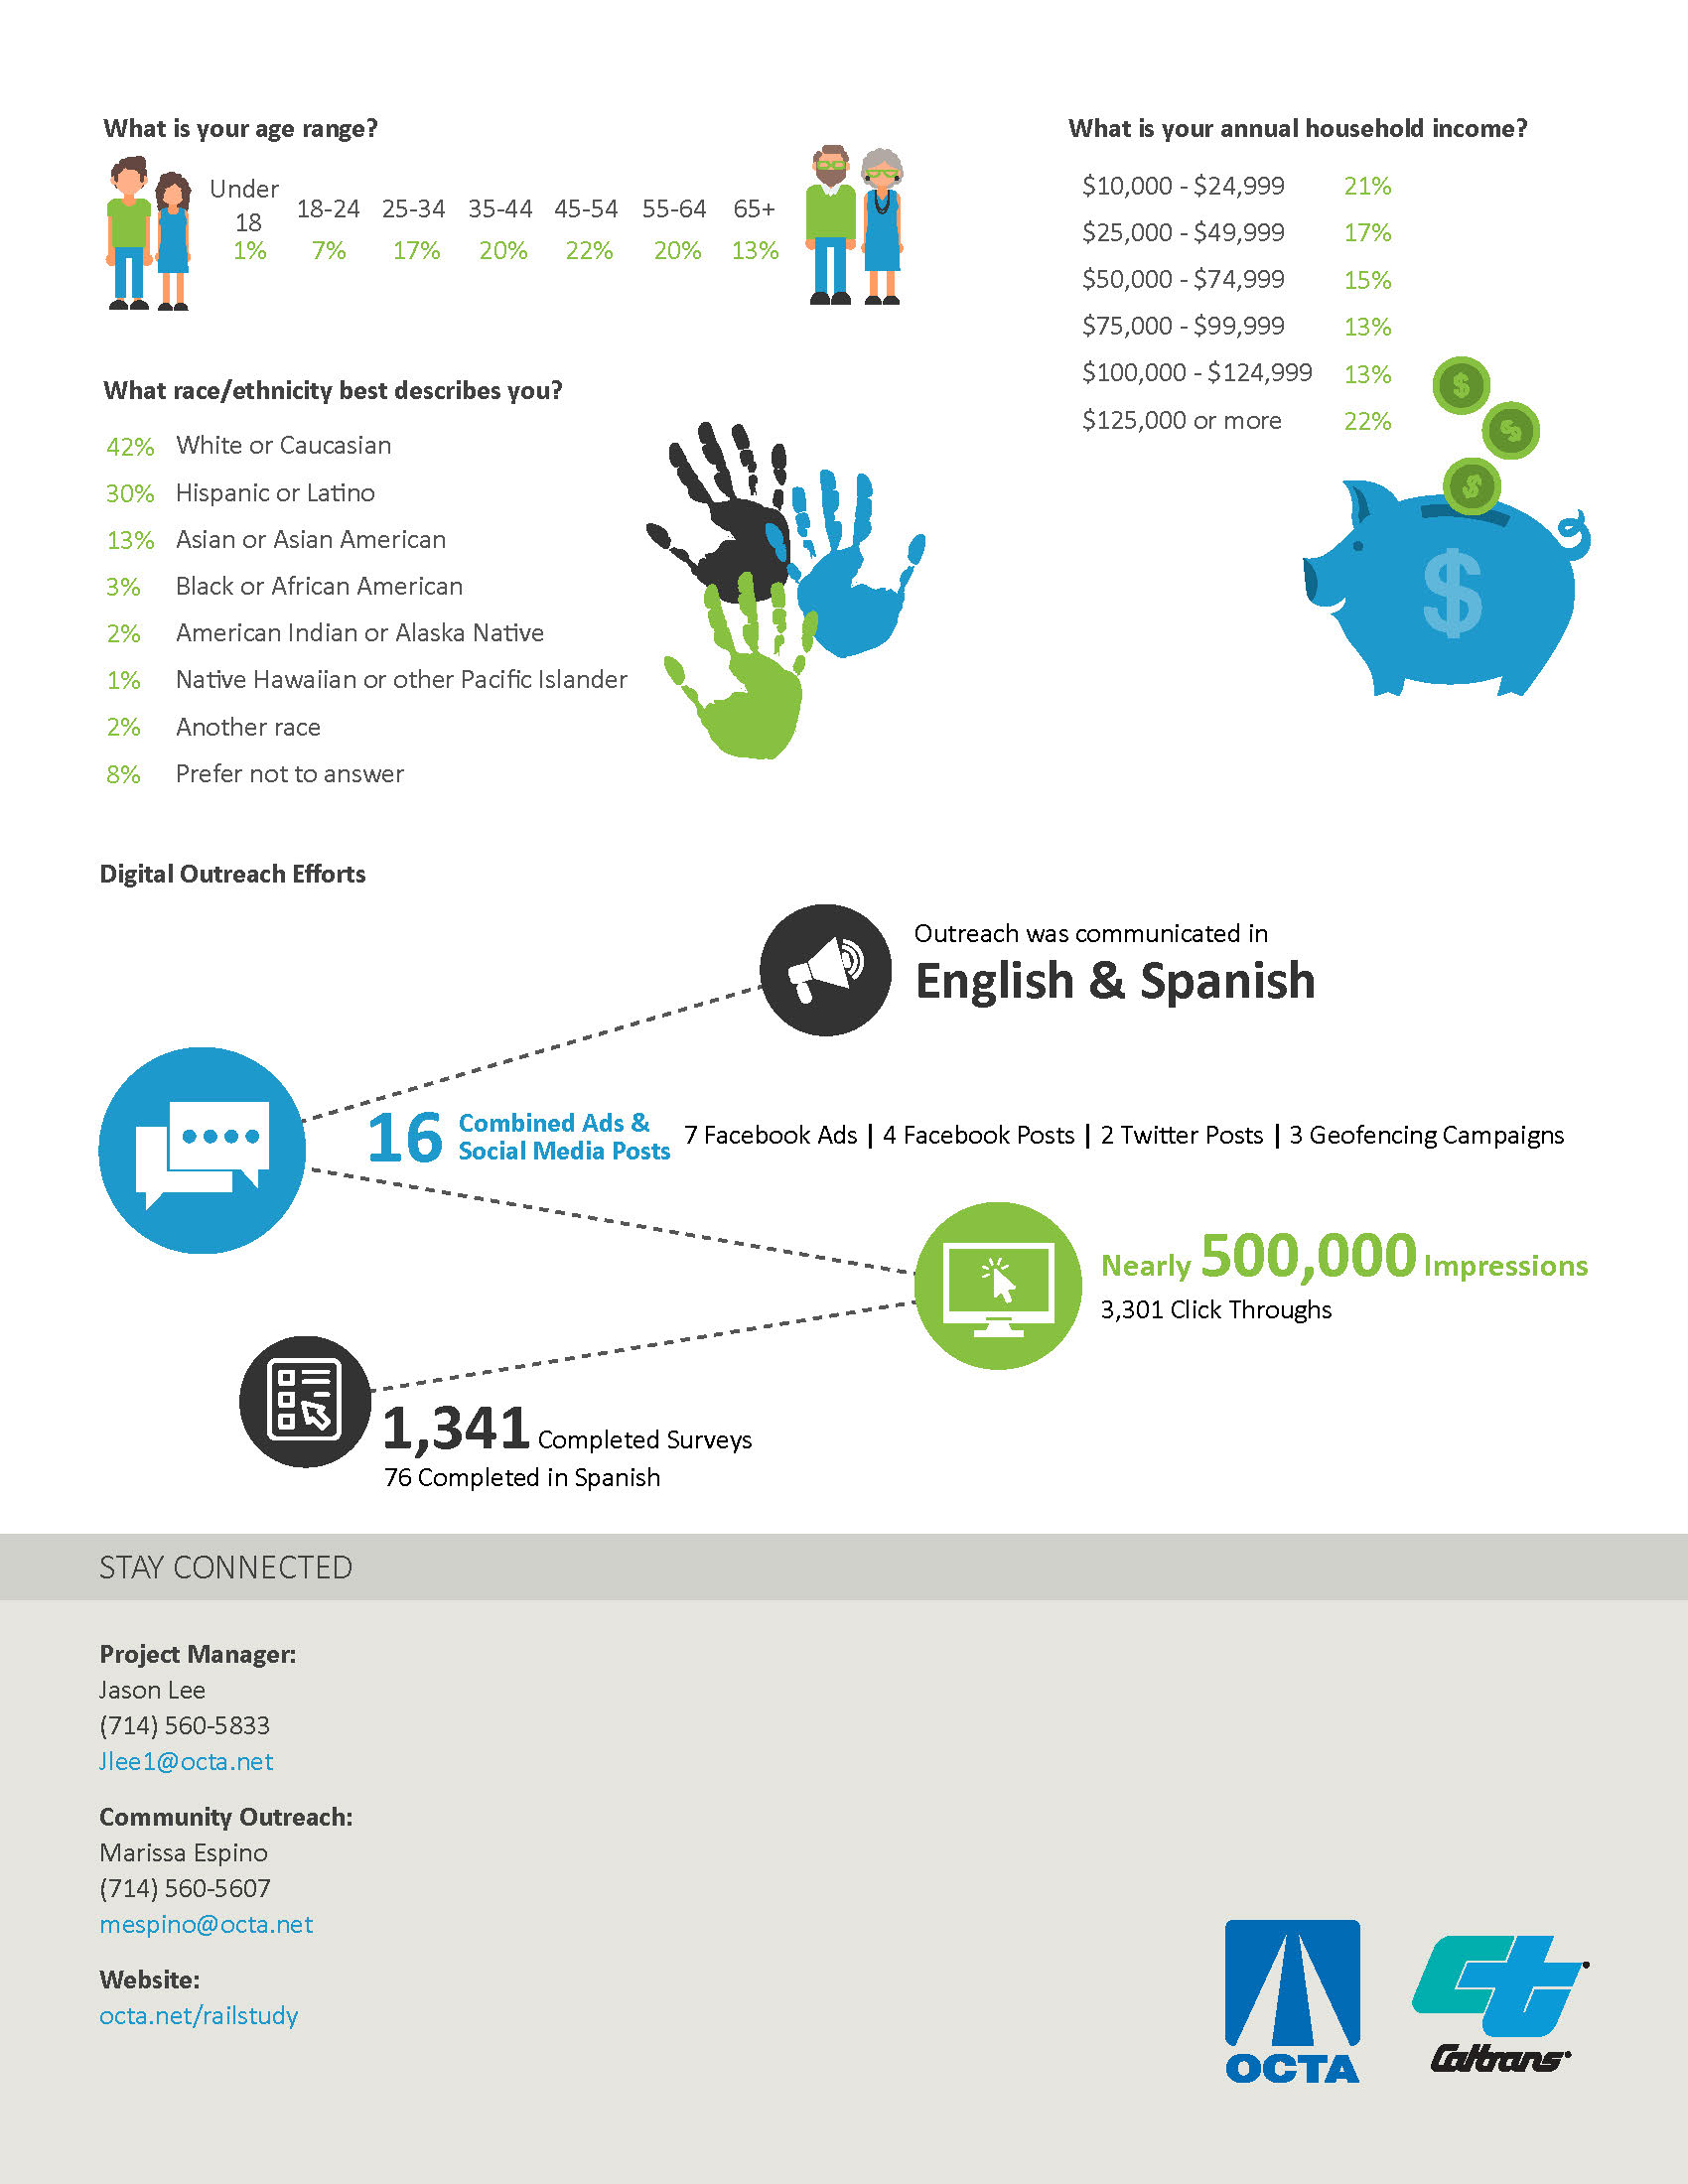 An infographic showing demographic information from the outreach survey.